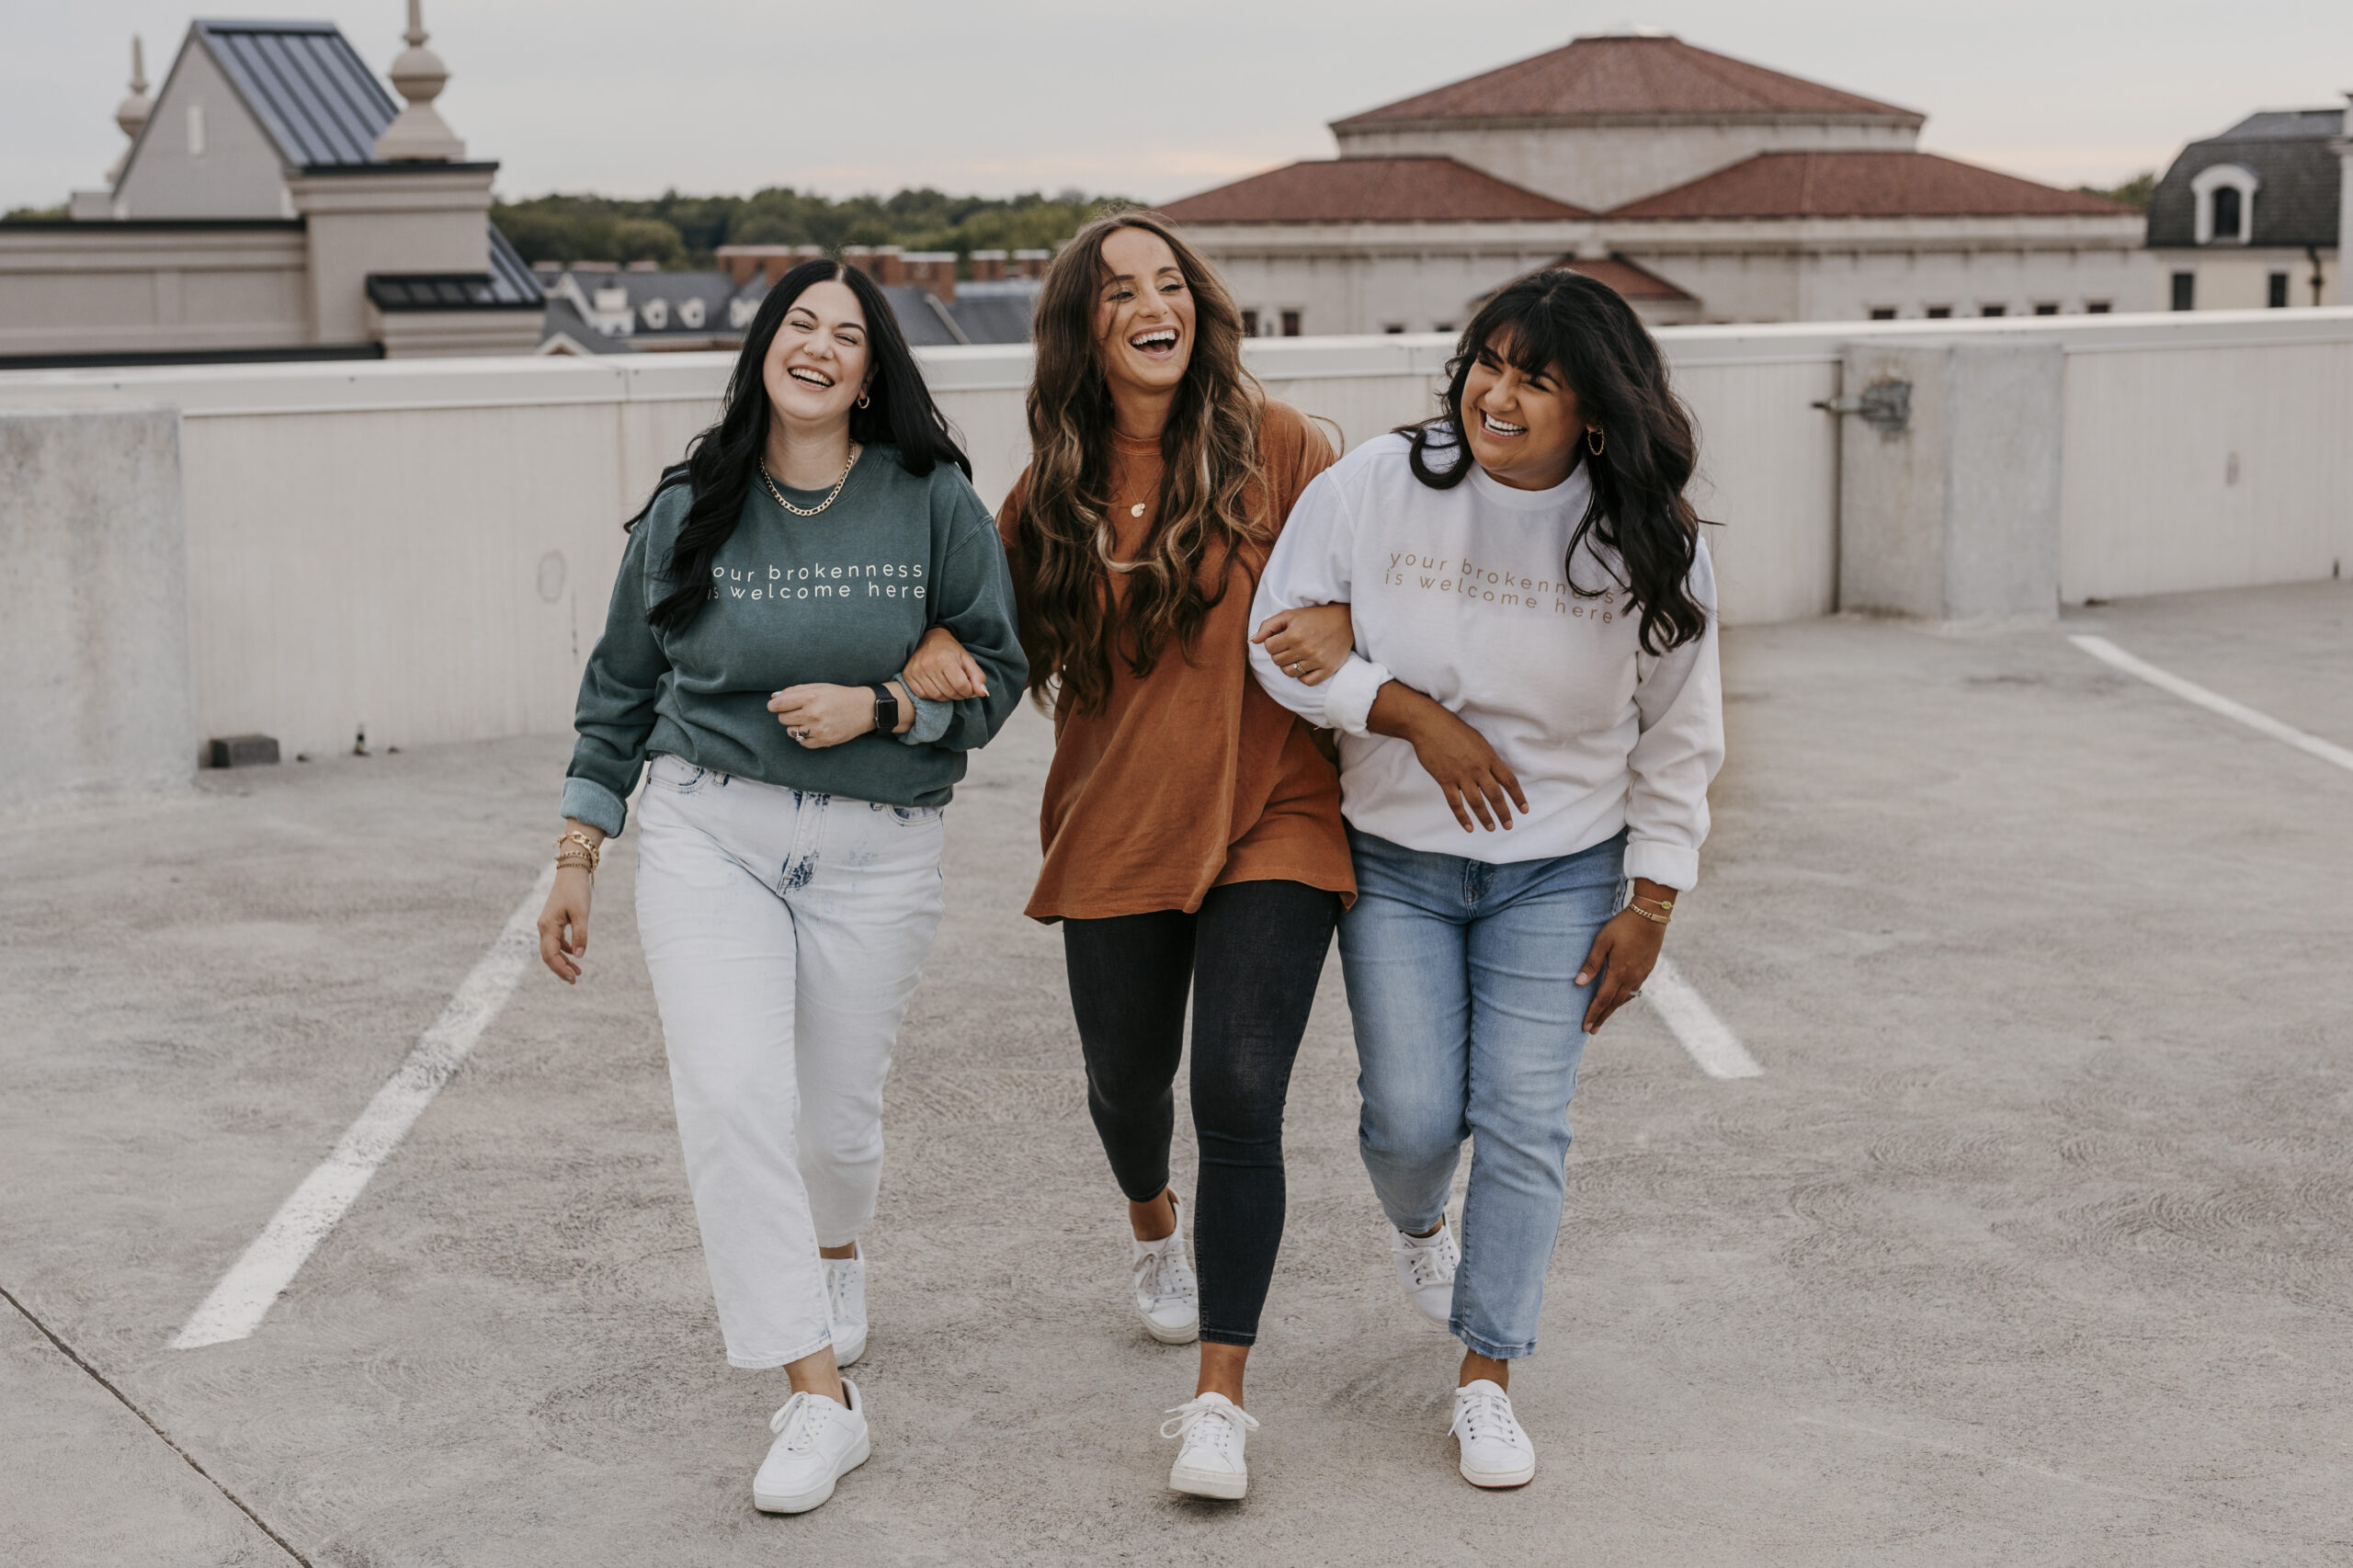 This image shows three friends walking and smiling with their arms linked.